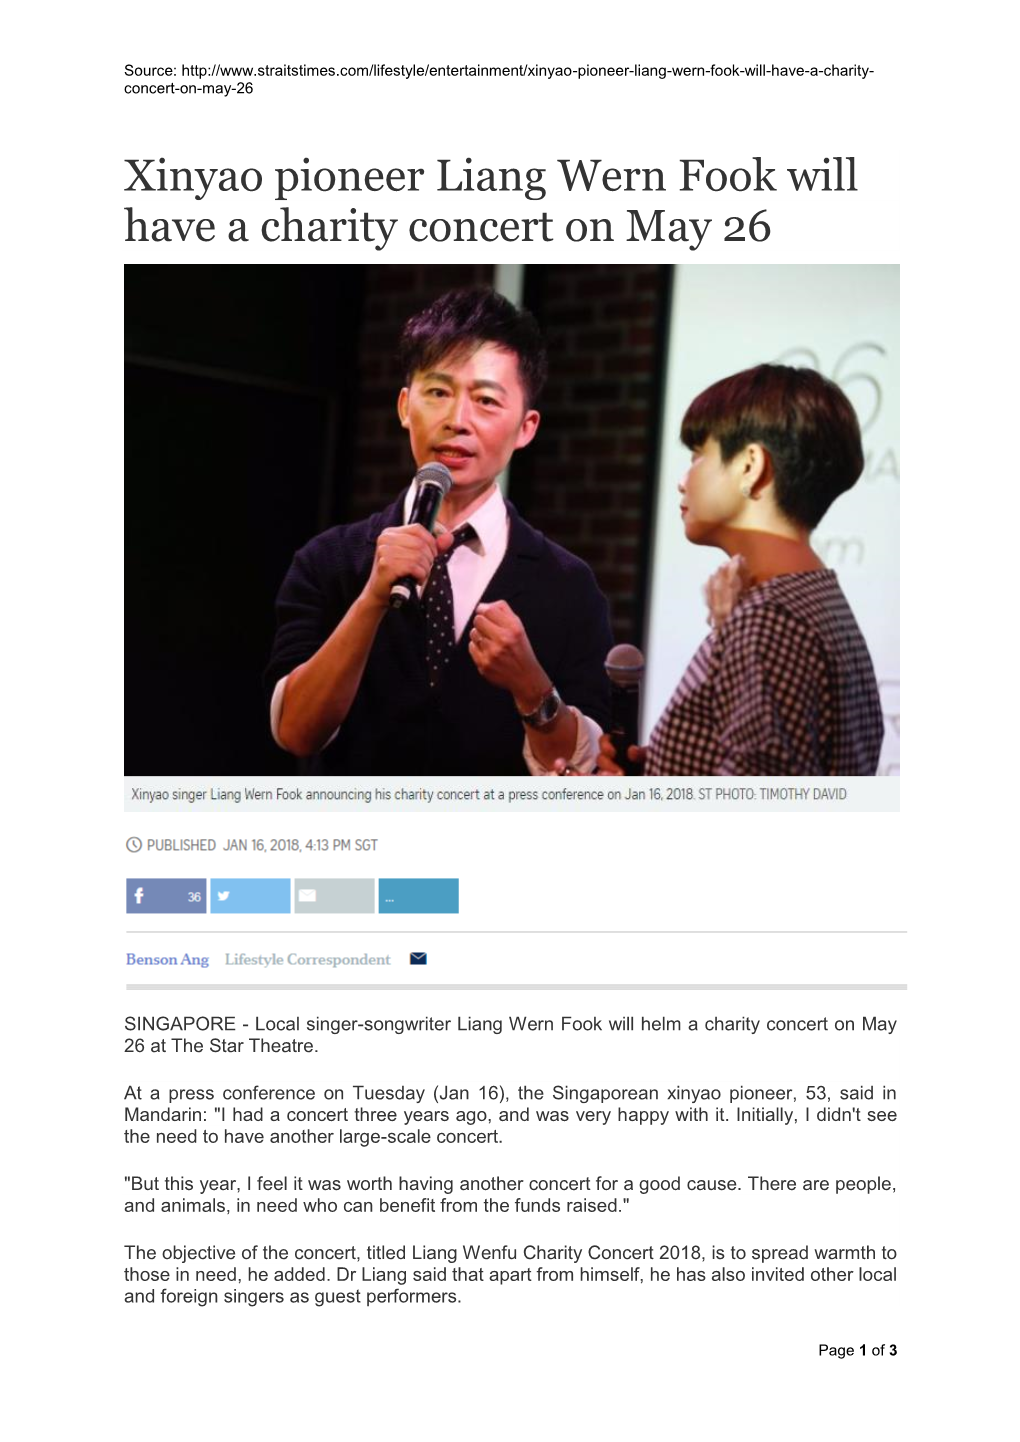 Xinyao Pioneer Liang Wern Fook Will Have a Charity Concert on May 26